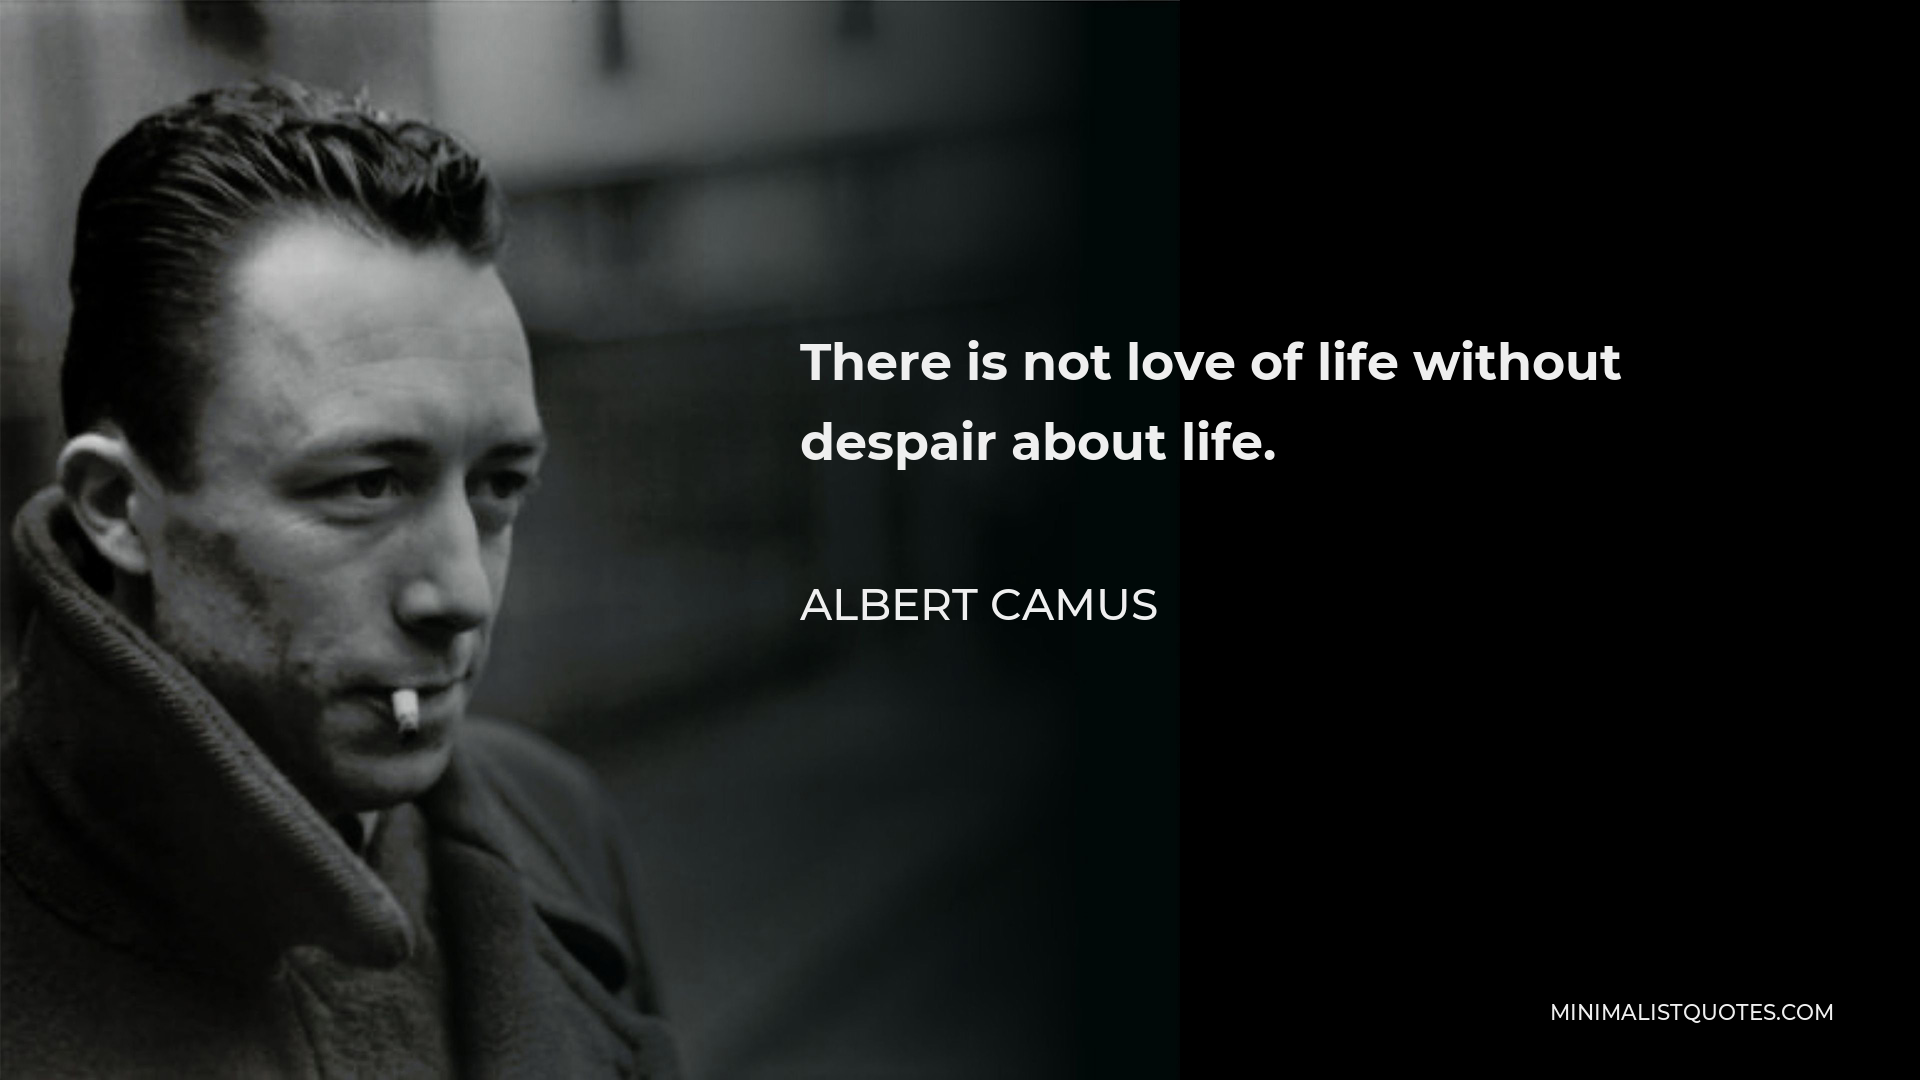 Albert Camus Quote - There is not love of life without despair about life.